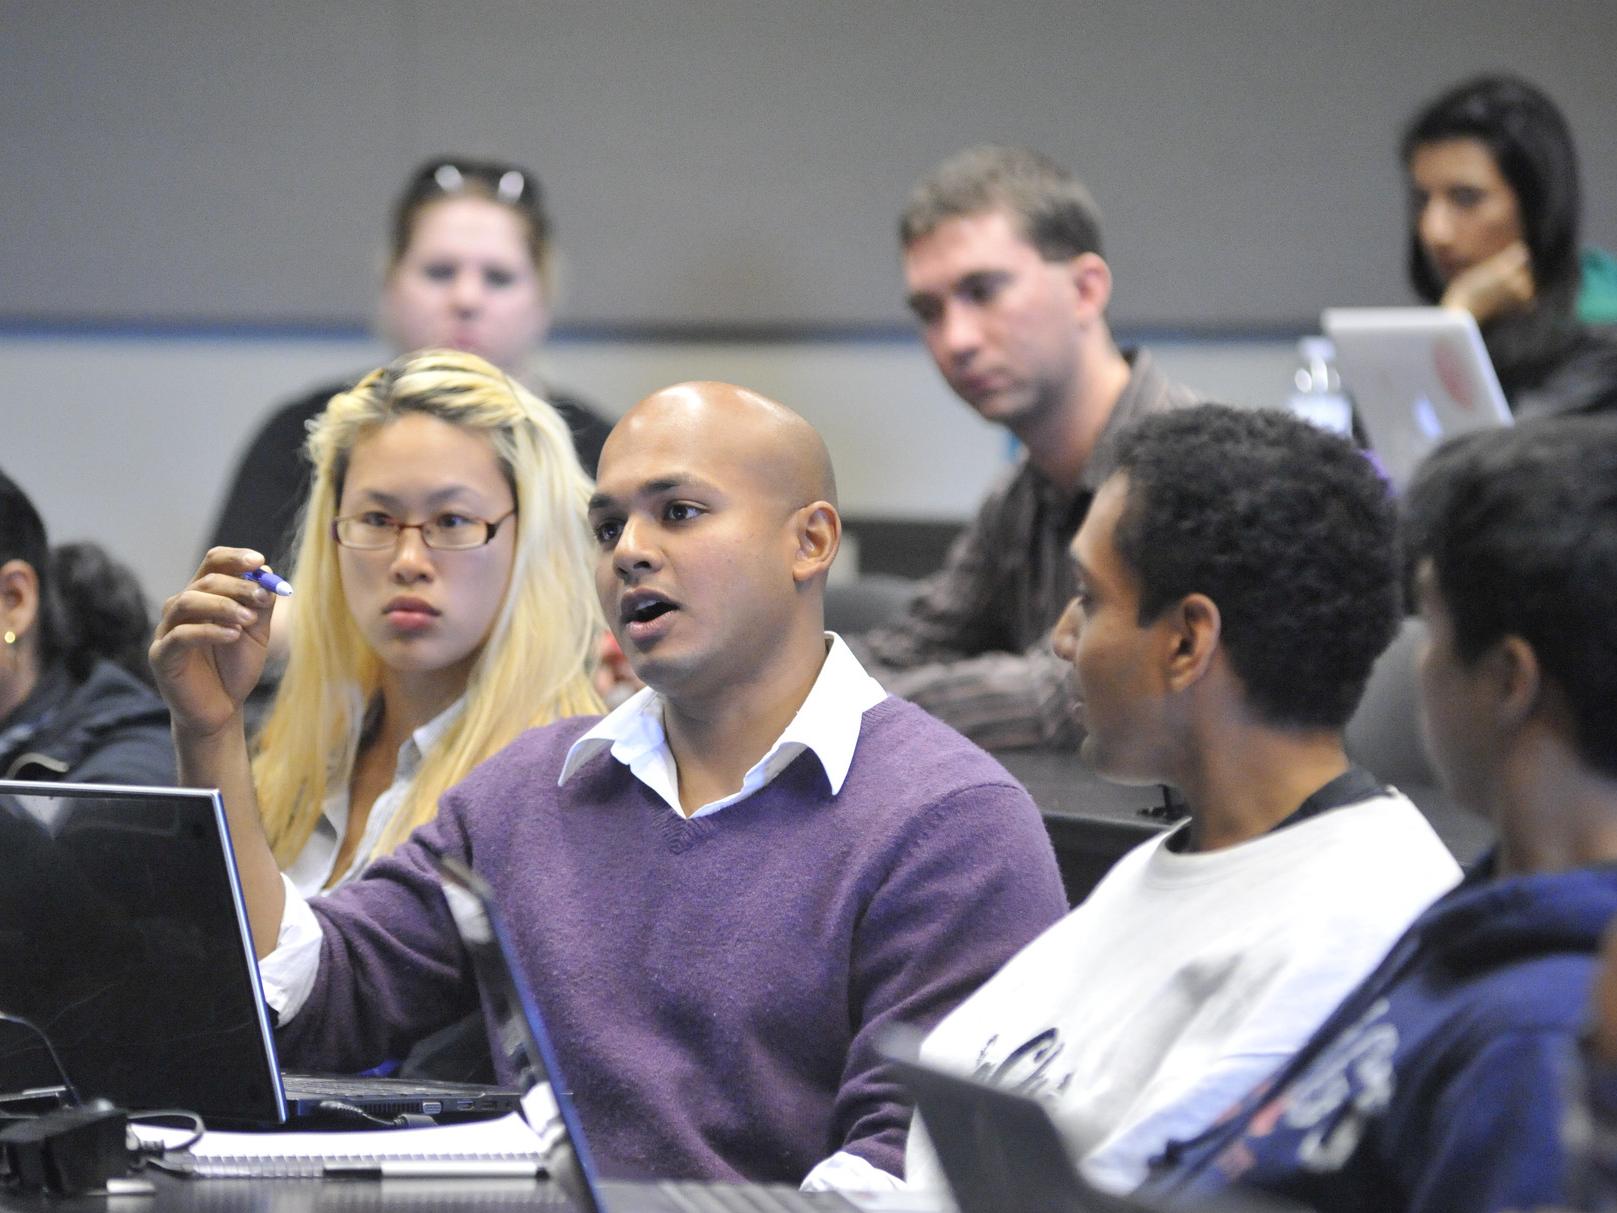 Students in discussion in a lecture hall